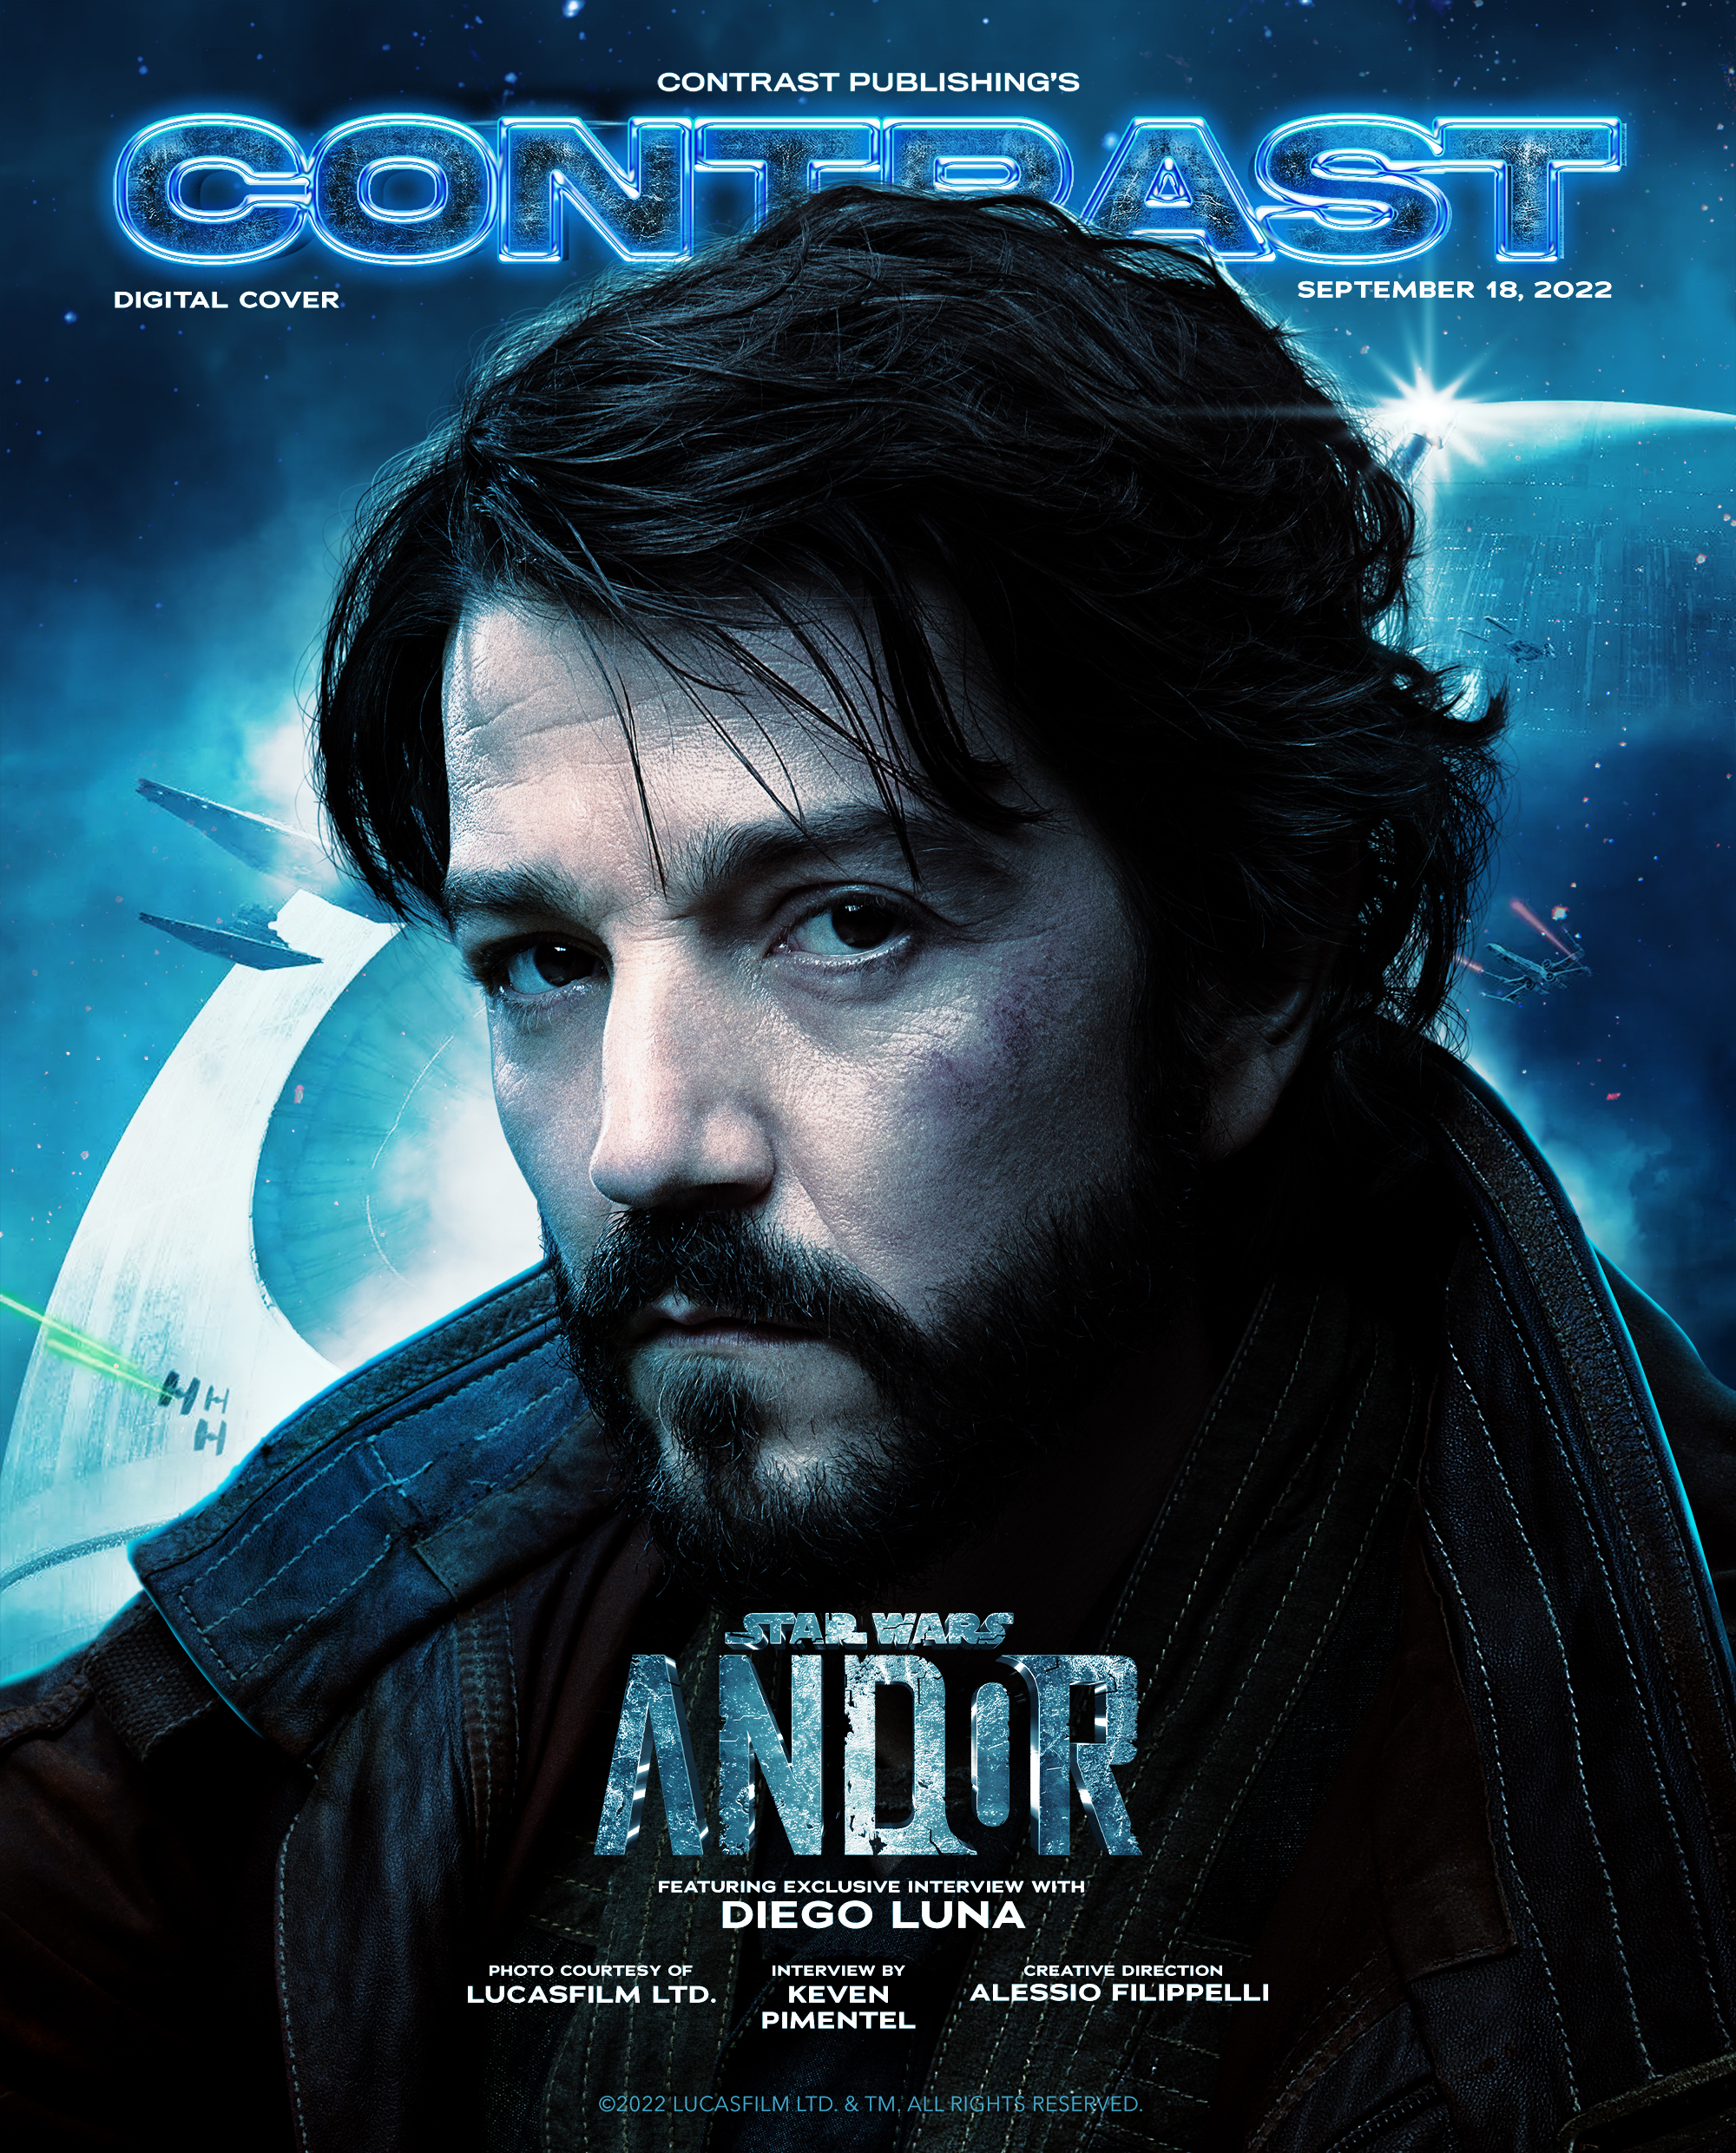 Mexican actor Diego Luna on the cover of Contrast Magazine. This cover is a promotional editorial in collaboration with Disney, Lucasfilm and "Star Wars" for the all new Disney+ series "ANDOR" following the story of Cassienne Andor. The cover image is of Diego Luna posing in front of a futuristic, sci-fi image including Star Wars ship and lasers.